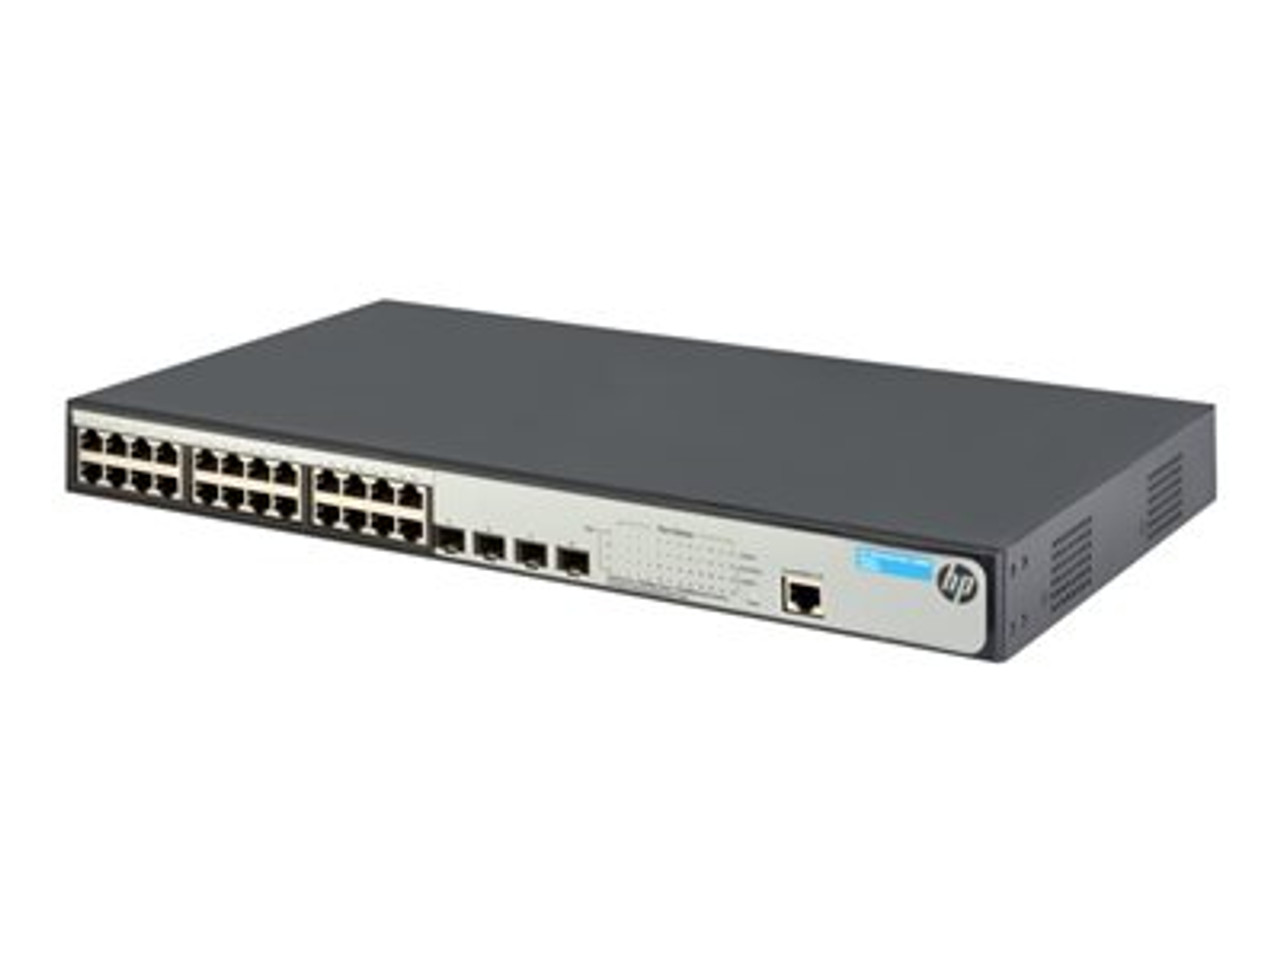 JG925A | HPE OfficeConnect 1920 24G PoE+ (180W) Switch